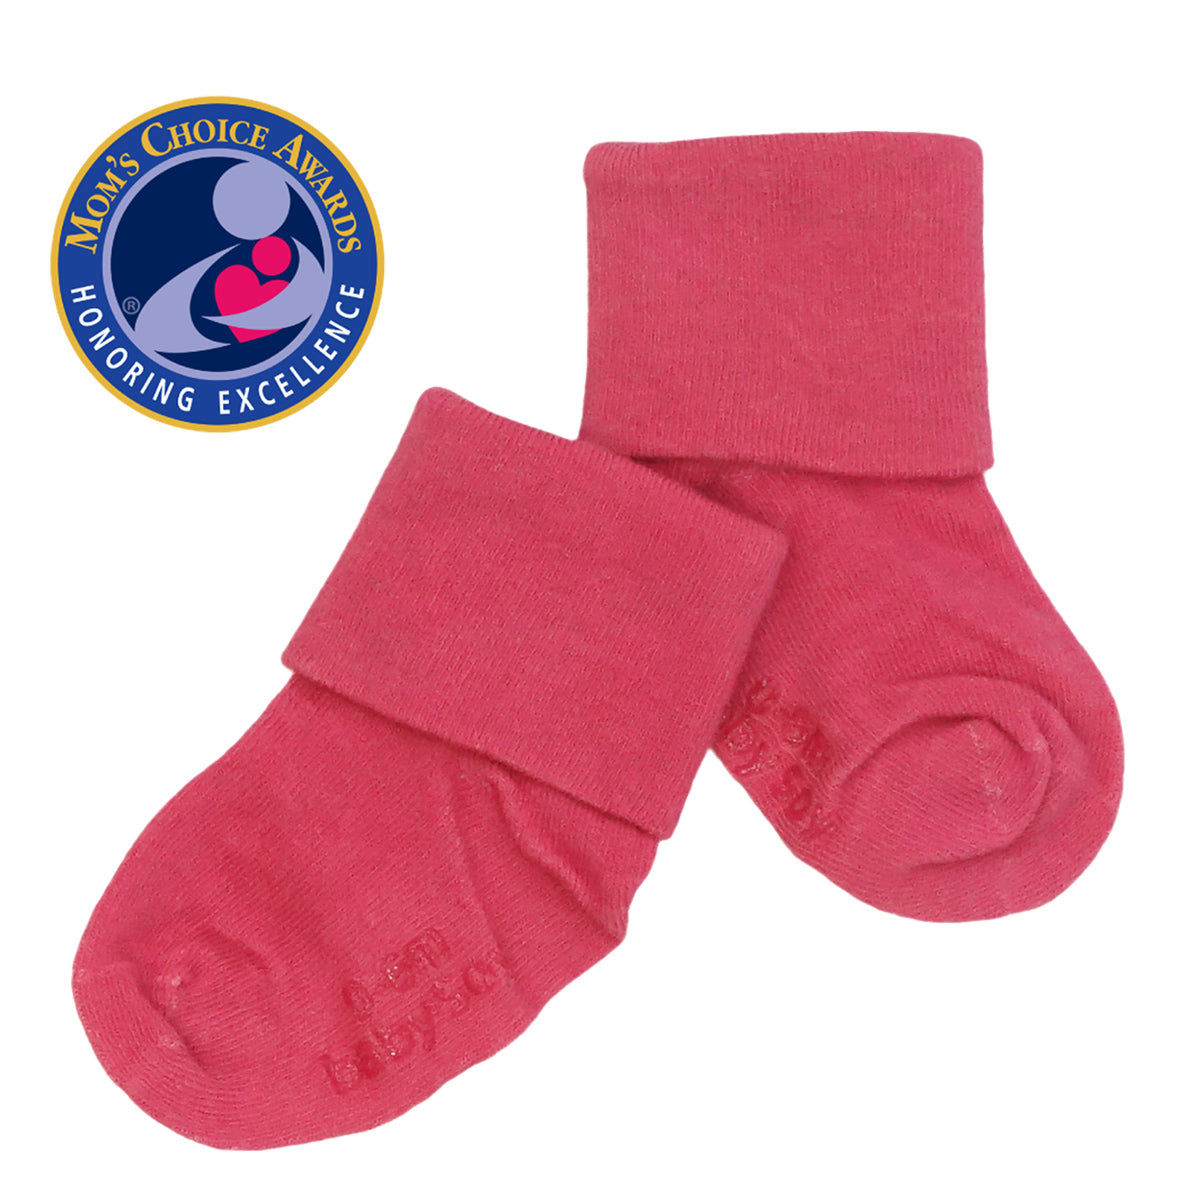 Stephan Baby Non-Skid Silly Socks Made for Walking, Fits 3-12 Months